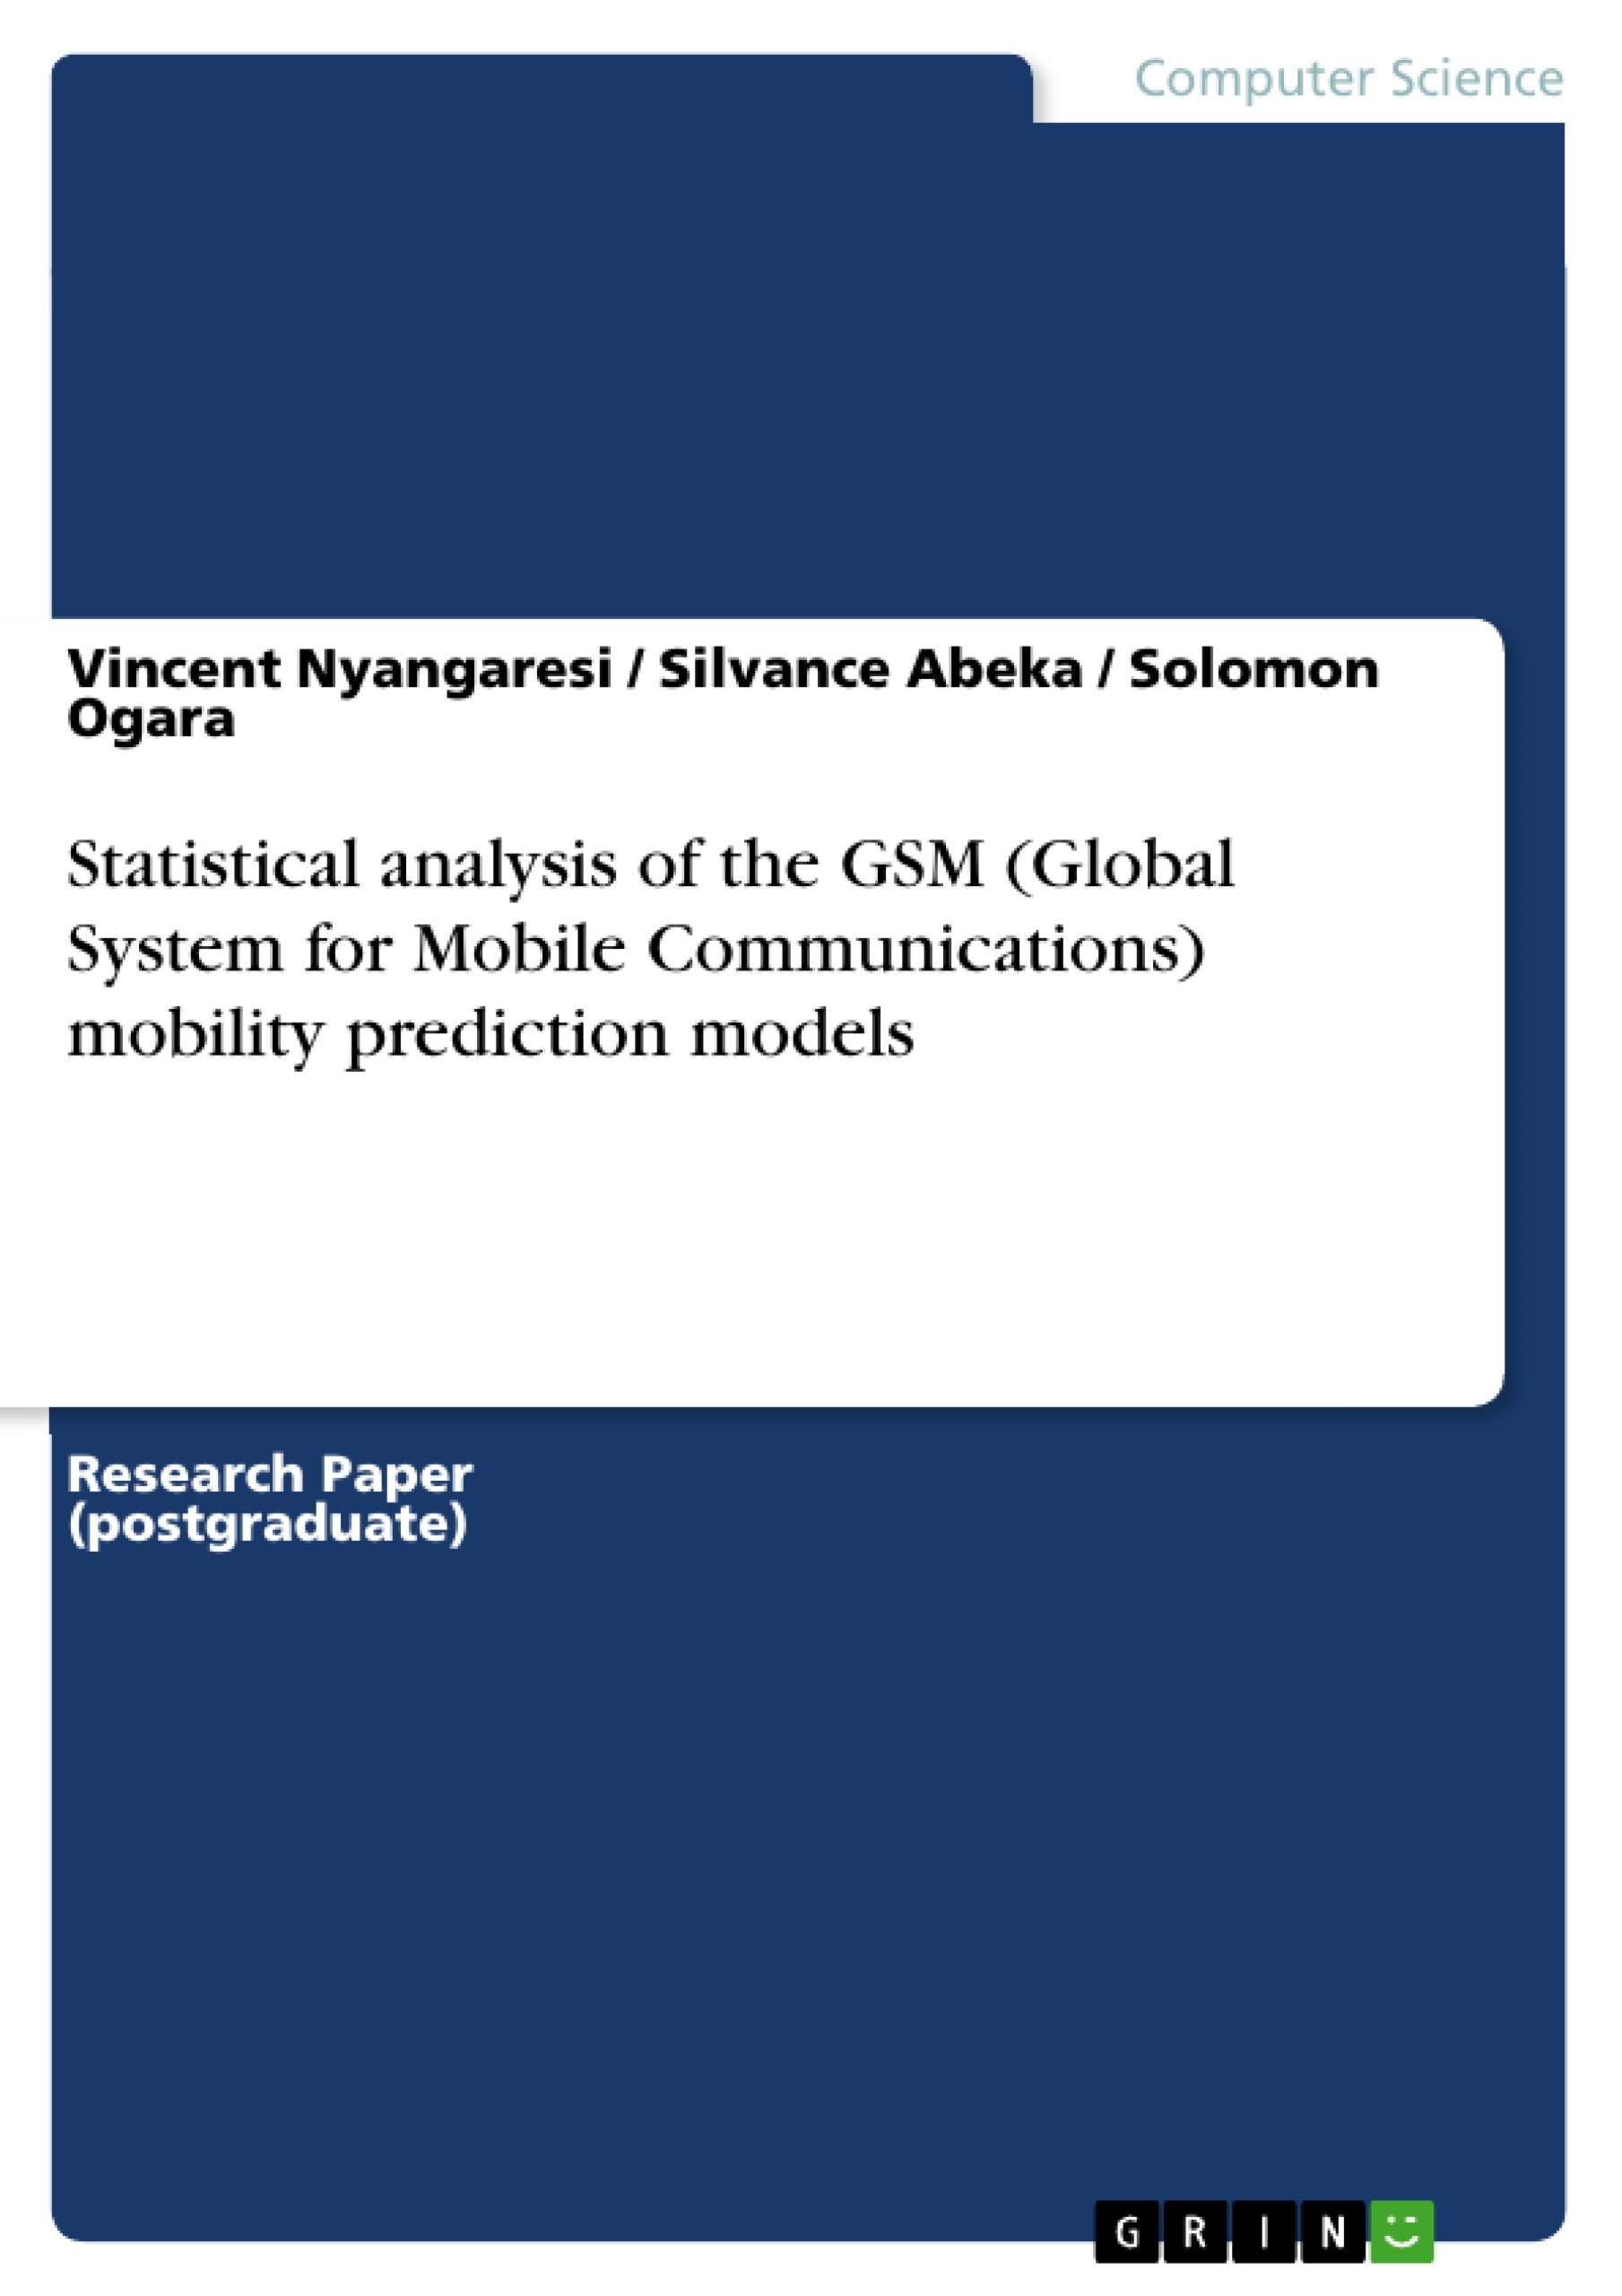 Título: Statistical analysis of the GSM (Global System for Mobile Communications) mobility prediction models